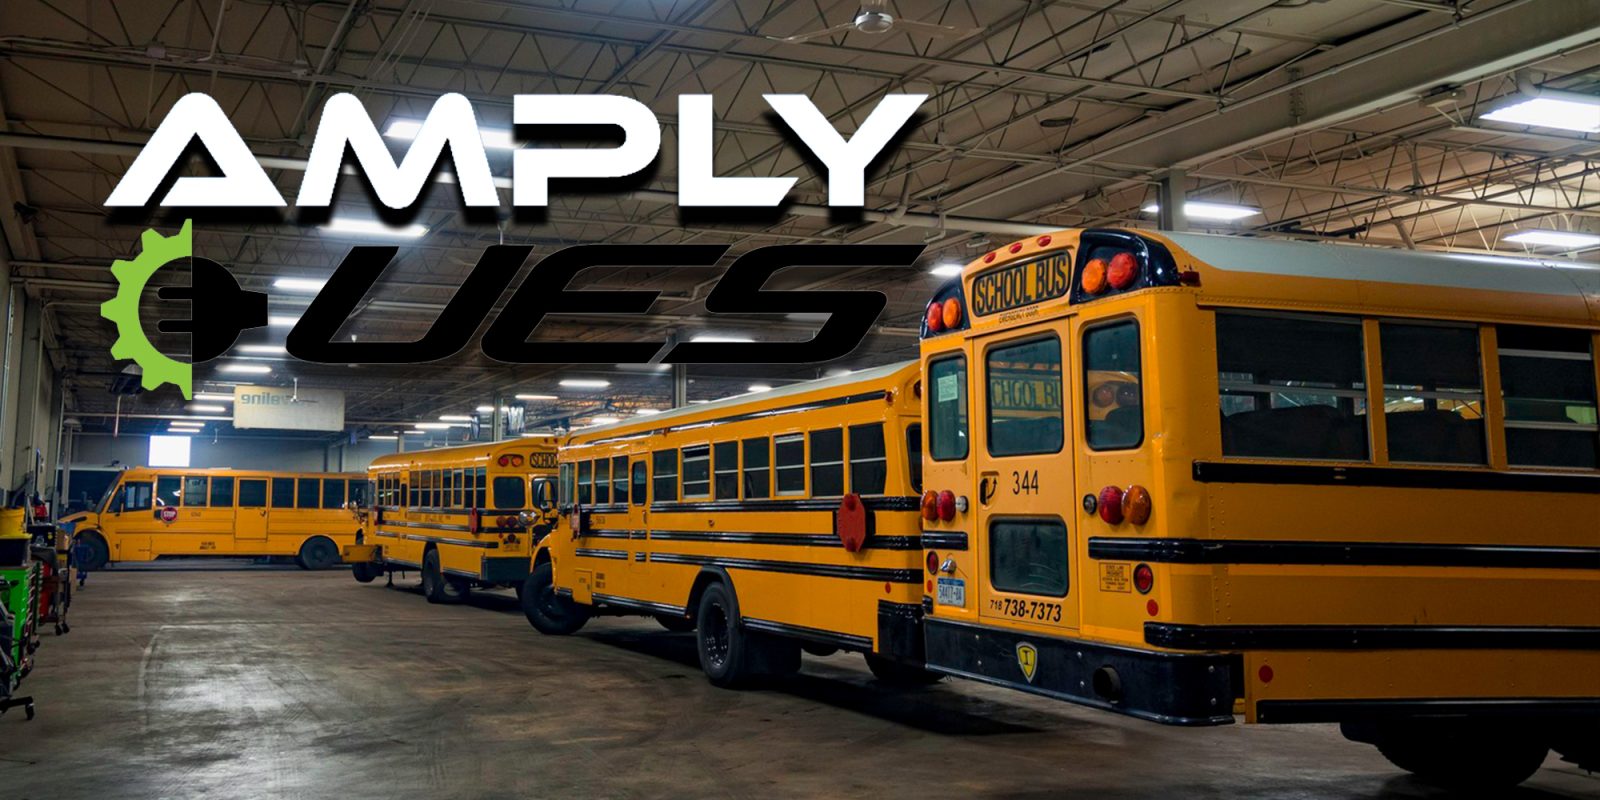 AMPLY Power buses